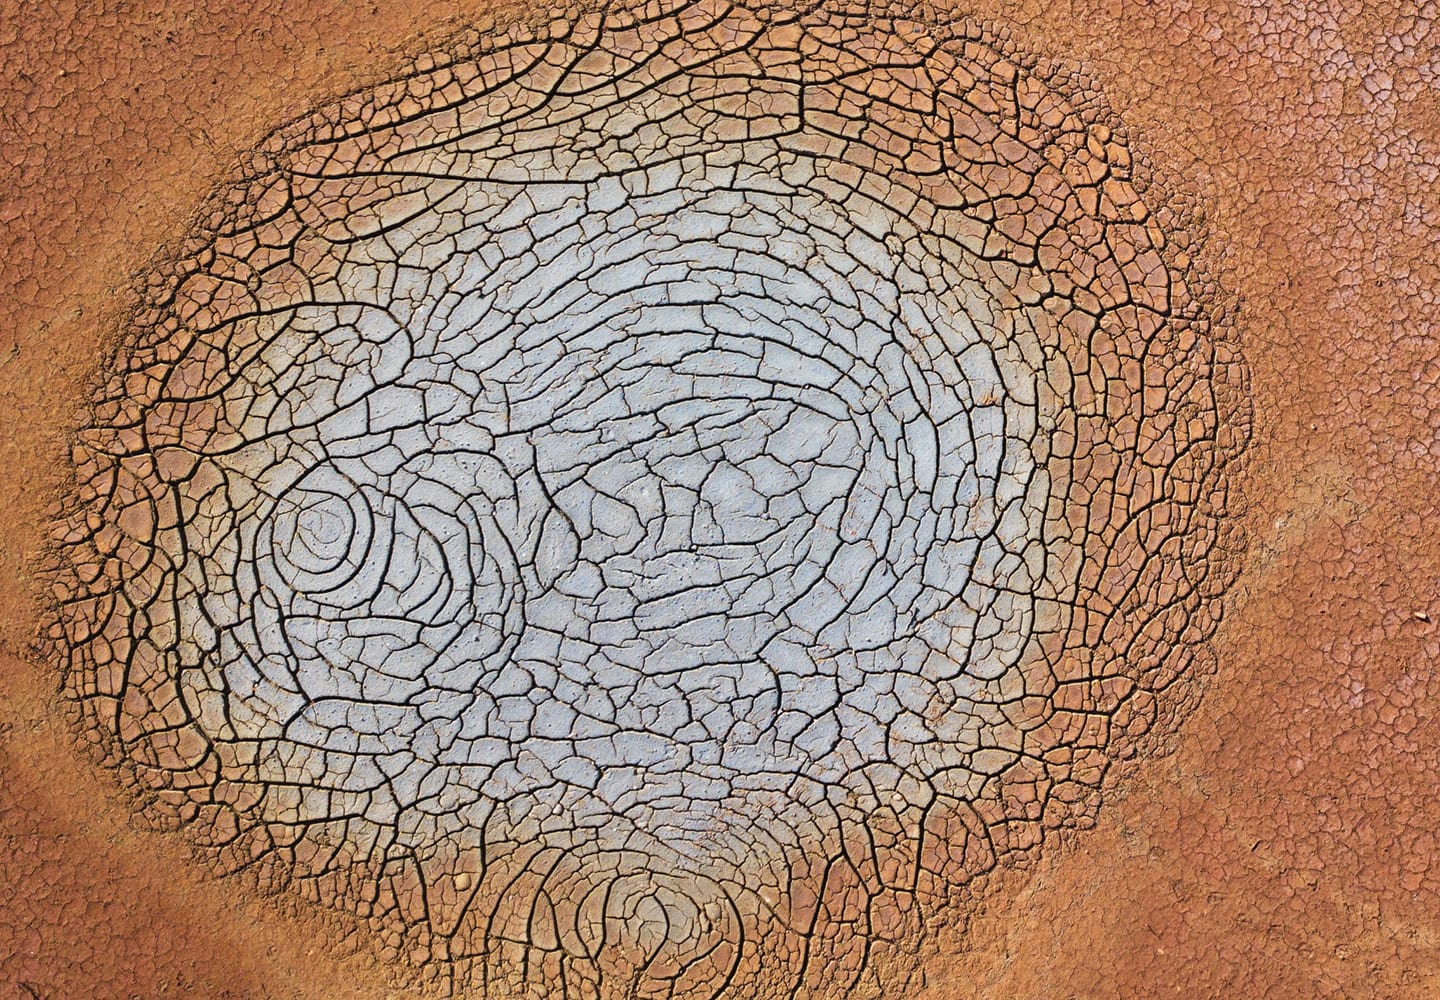 Dry and cracked red earth